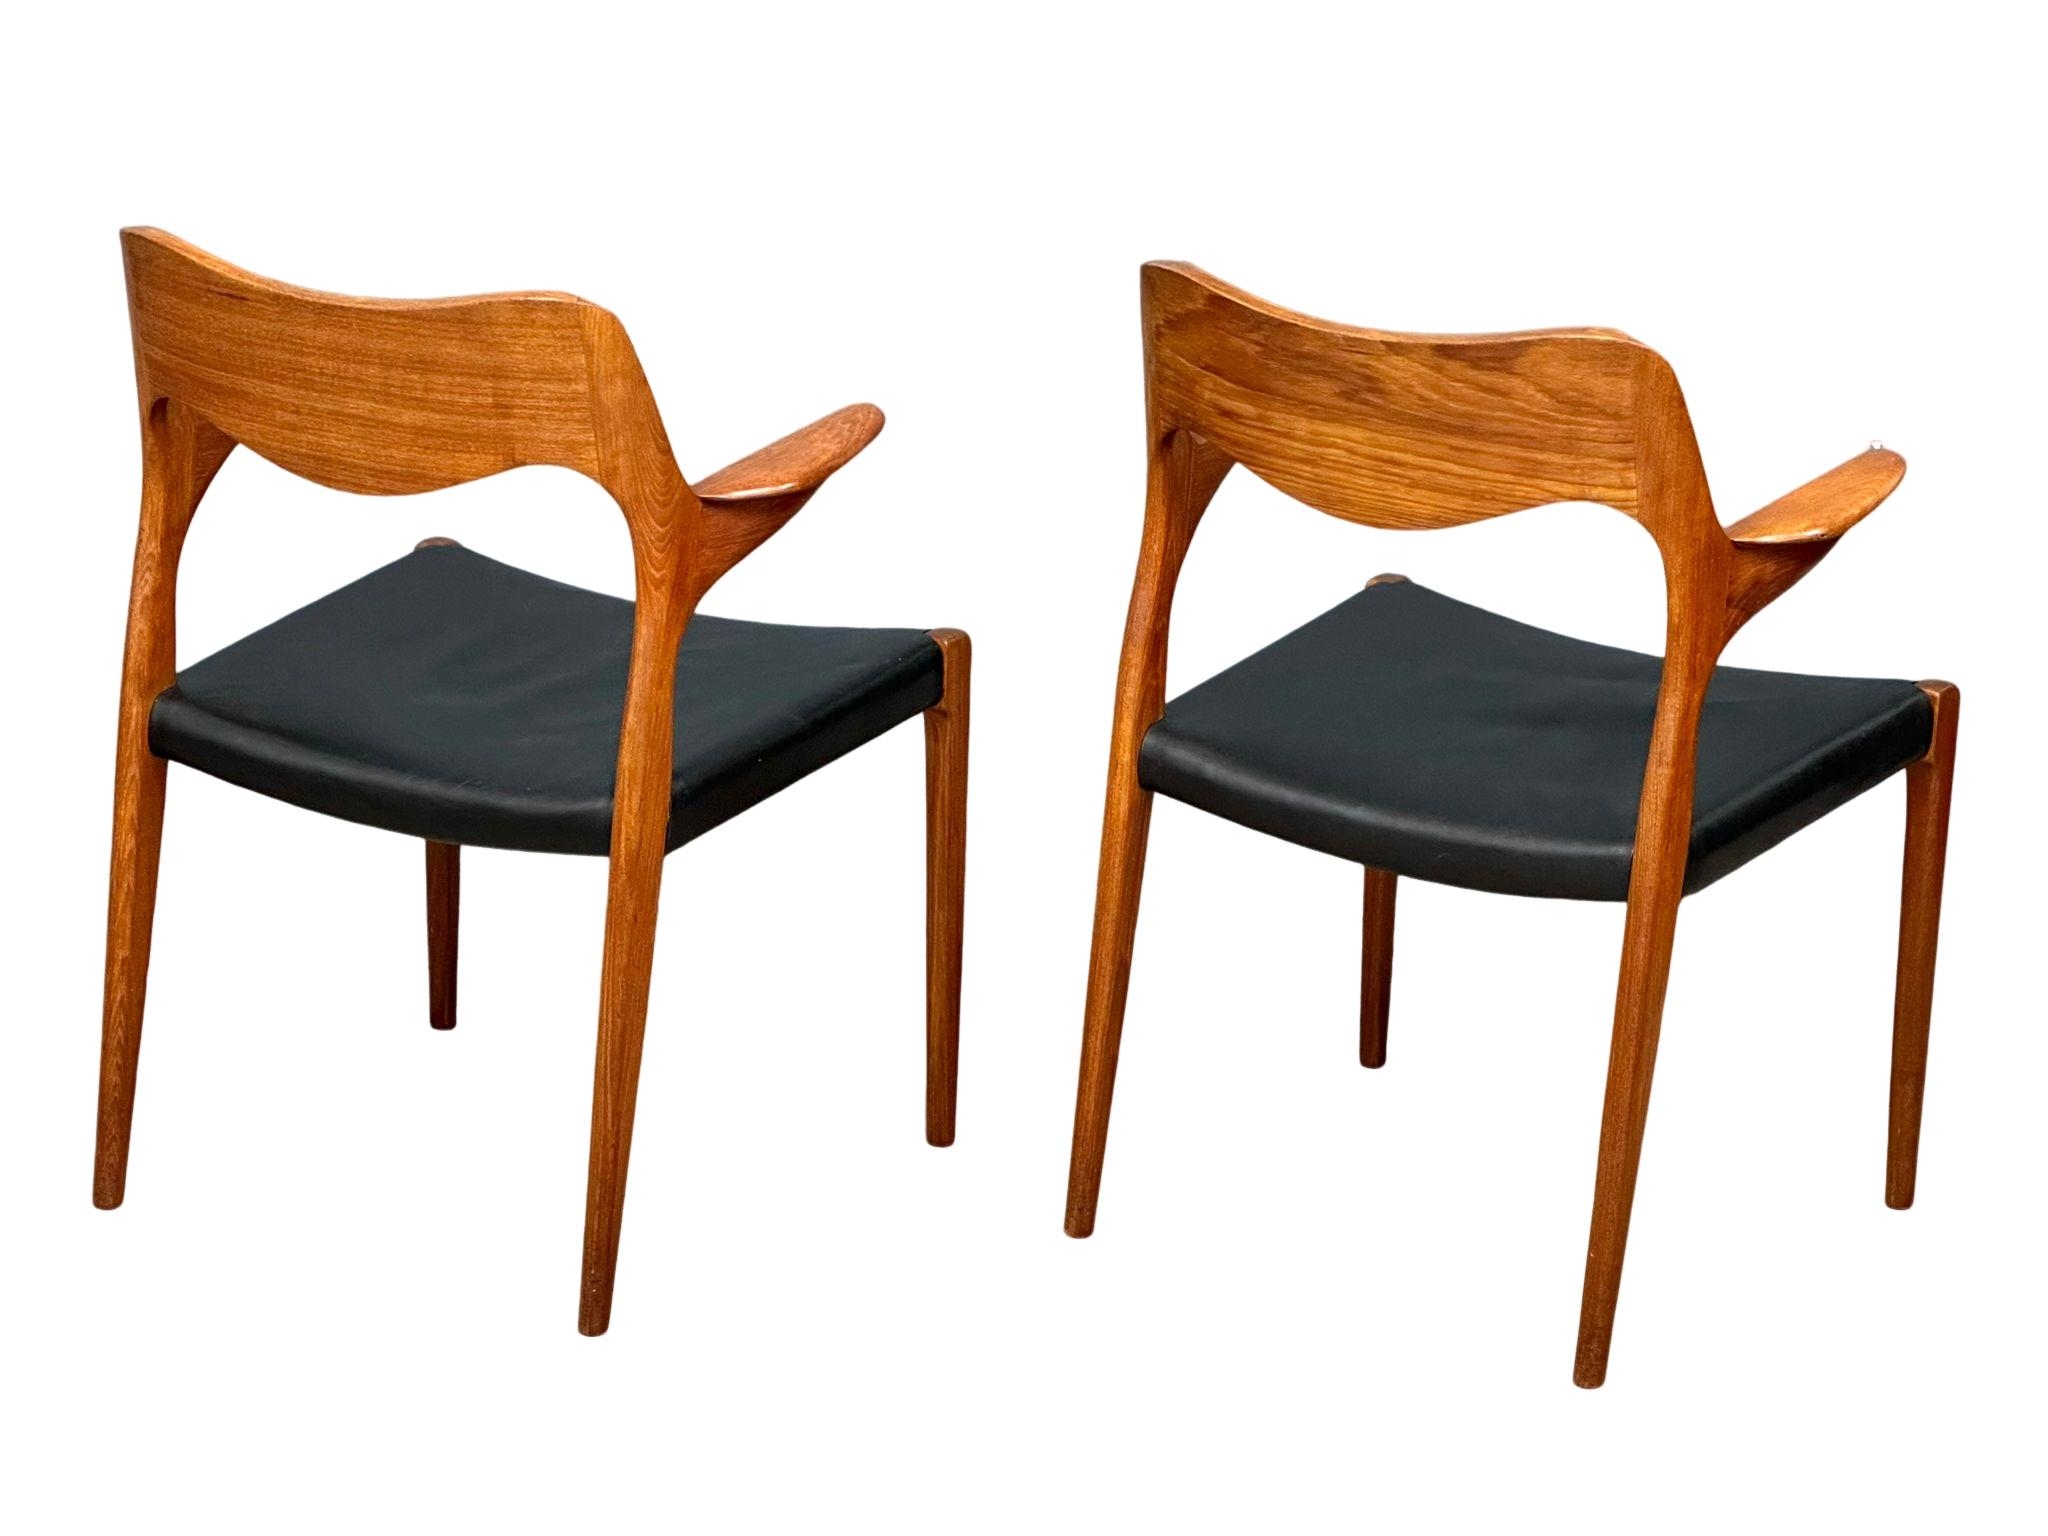 A pair of rare Danish Mid Century teak carver armchairs designed by Niels Otto Moller for J.L. - Image 6 of 12